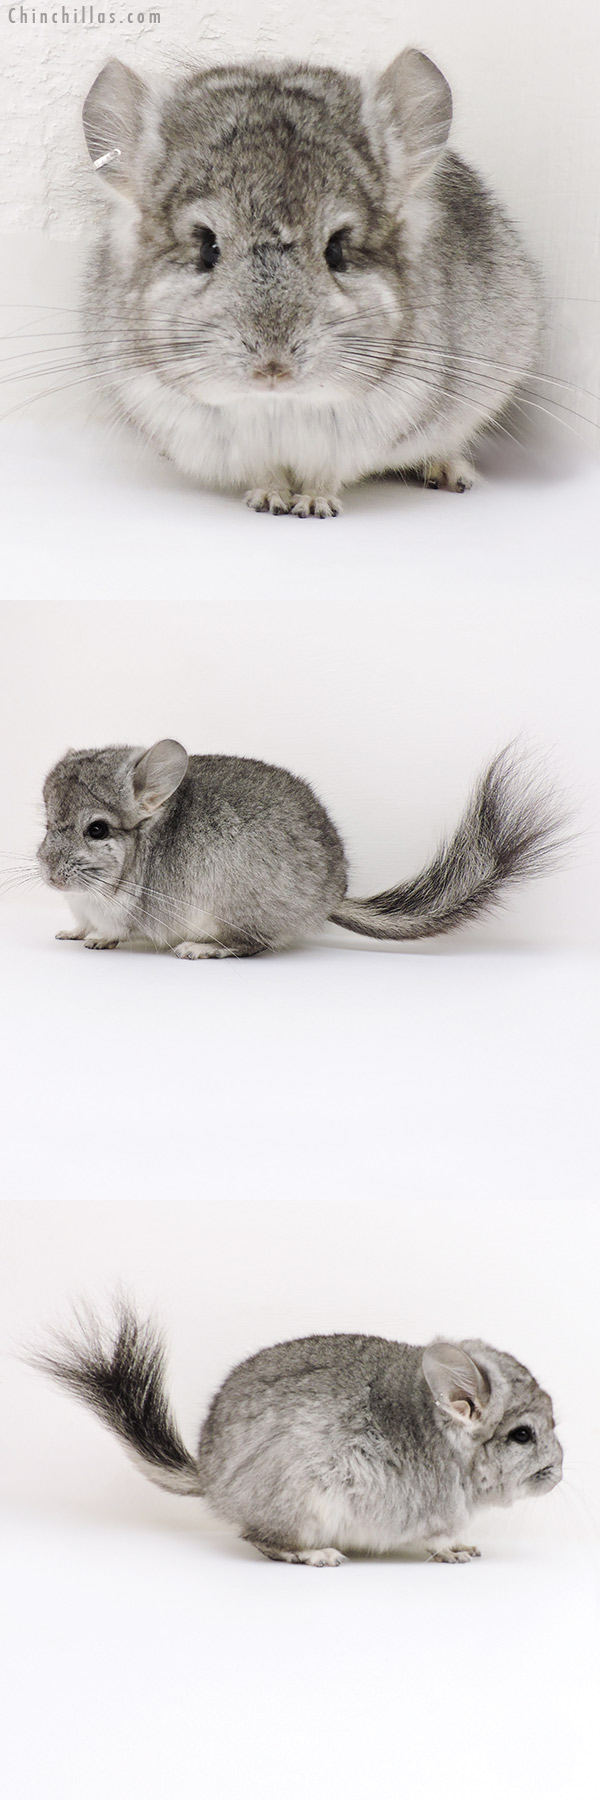 Chinchilla or related item offered for sale or export on Chinchillas.com - 16288 Standard  Royal Persian Angora Male Chinchilla